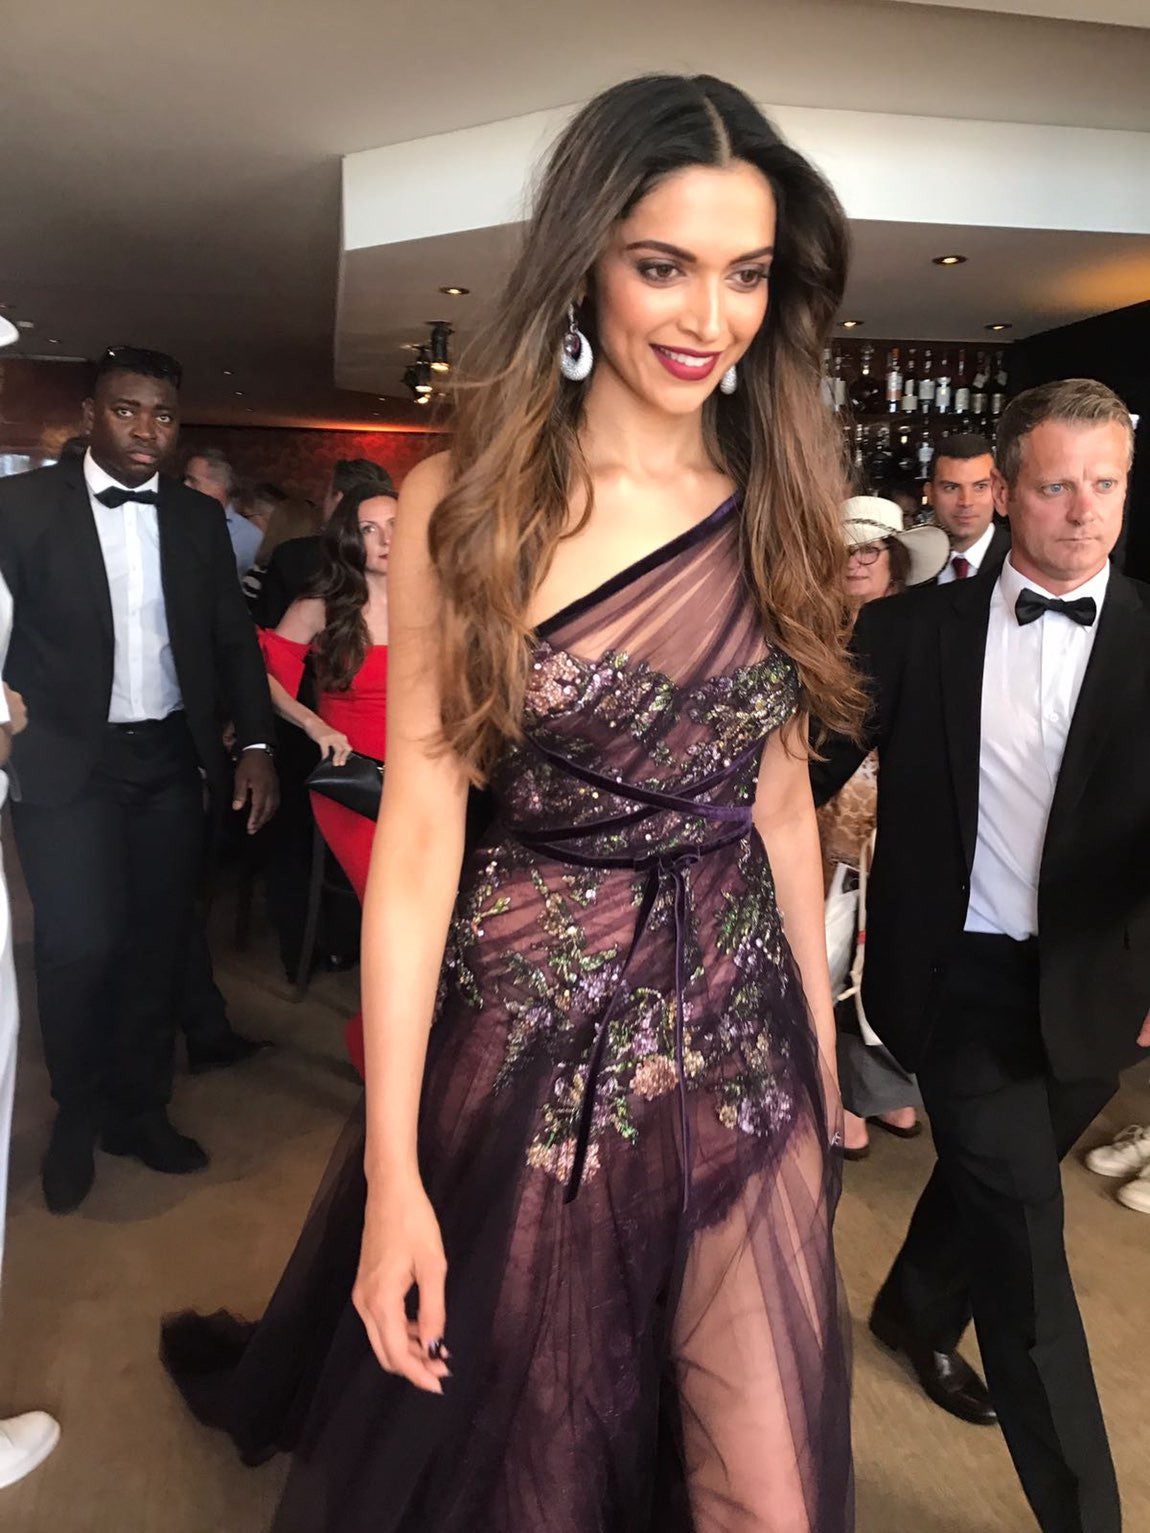 Deepika Padukone walked the red carpet for the Cannes Film Festival wore a sheer purple Marchesa outfit, and paired it with De Grisogono jewelry and Jimmy Choo heels